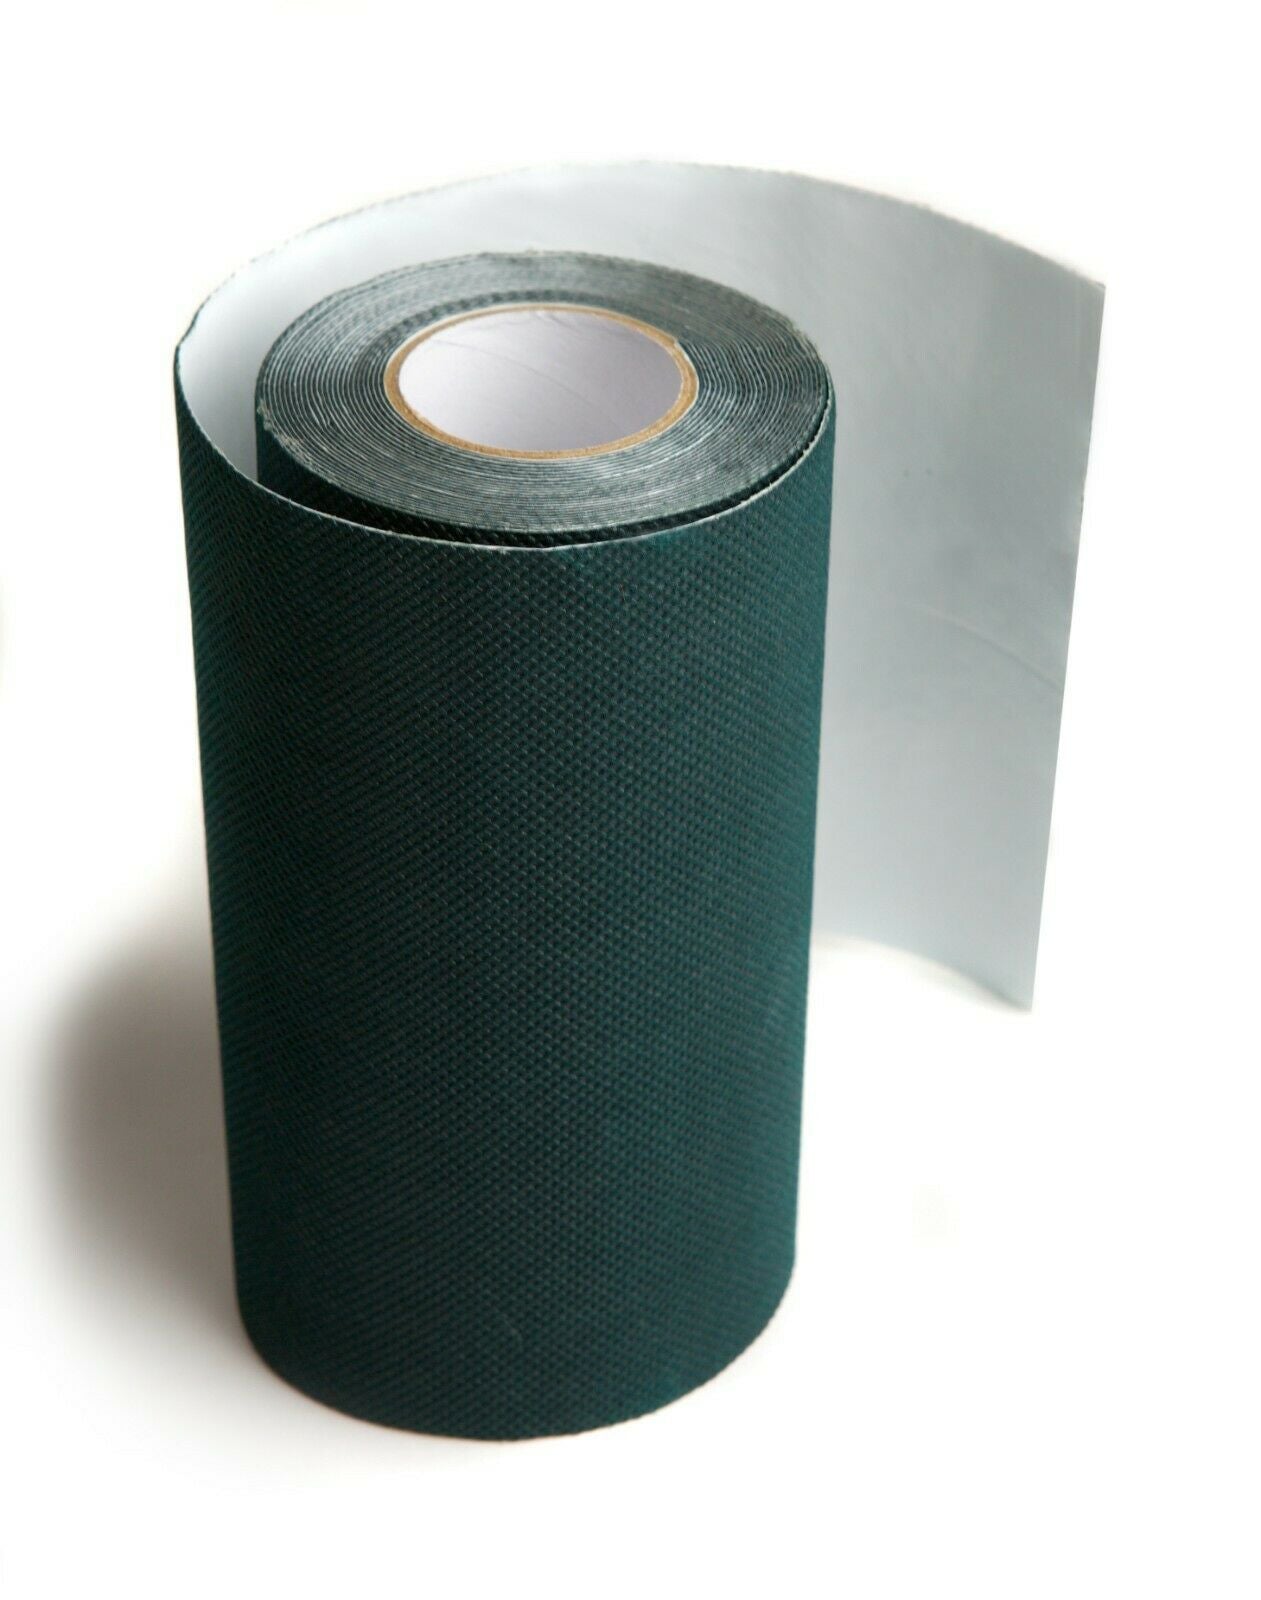 Grass Joining Tape (5m x 15cm)